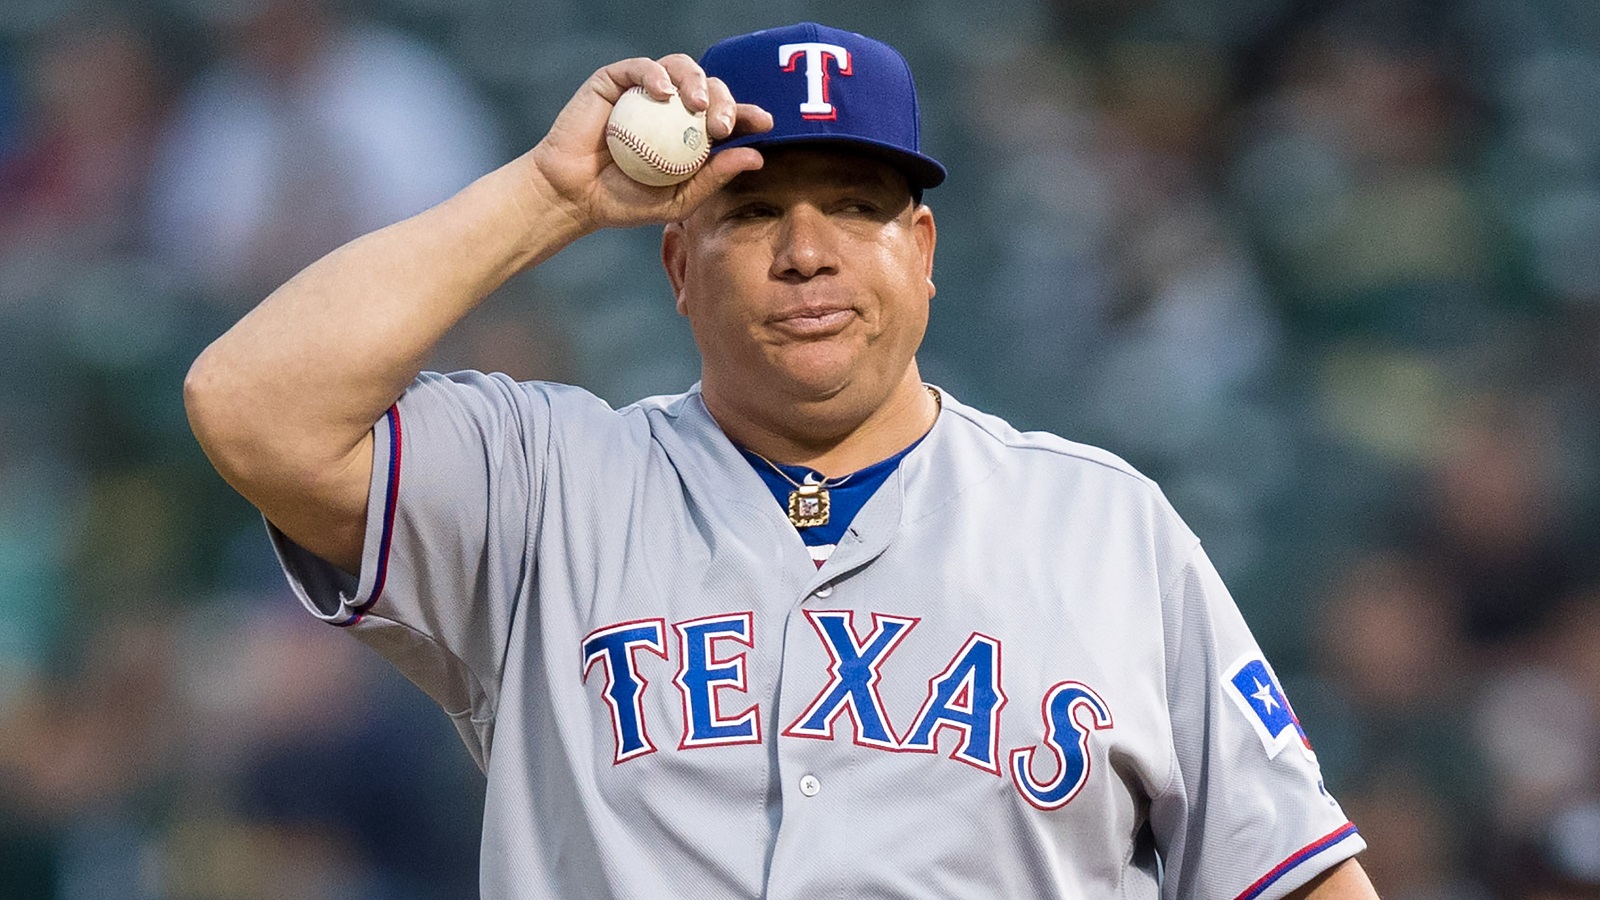 Bartolo Colon to be honored by MLB team after finally retiring